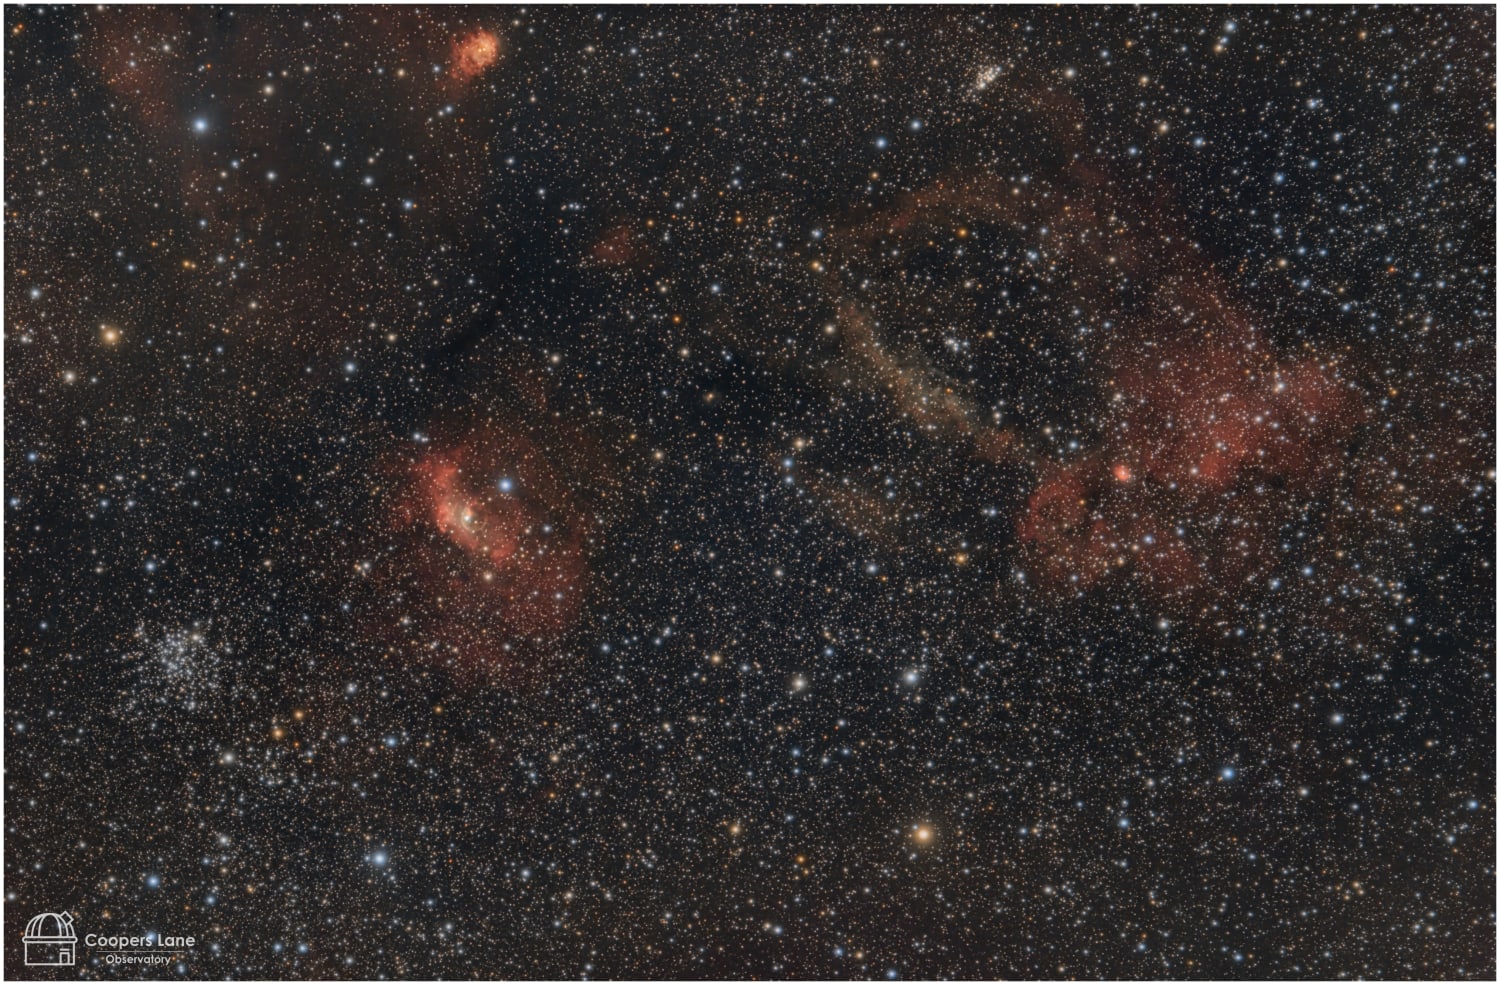 A widefield view around the Bubble and Lobster Claw nebulae, including M52 star cluster